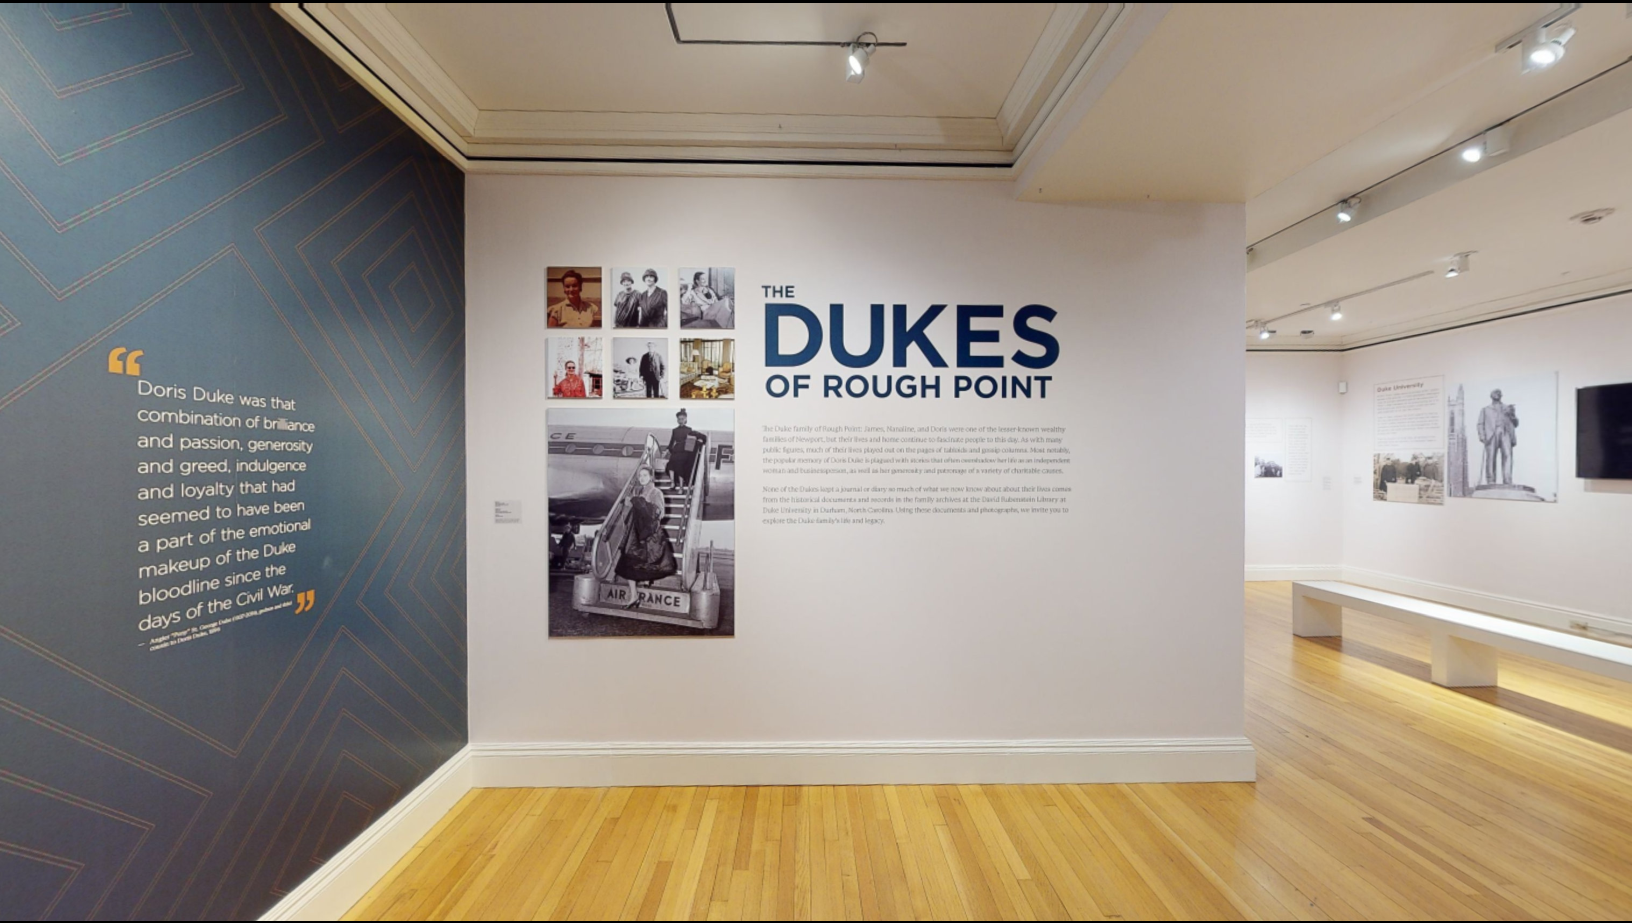 "The Dukes of Rough Point" display